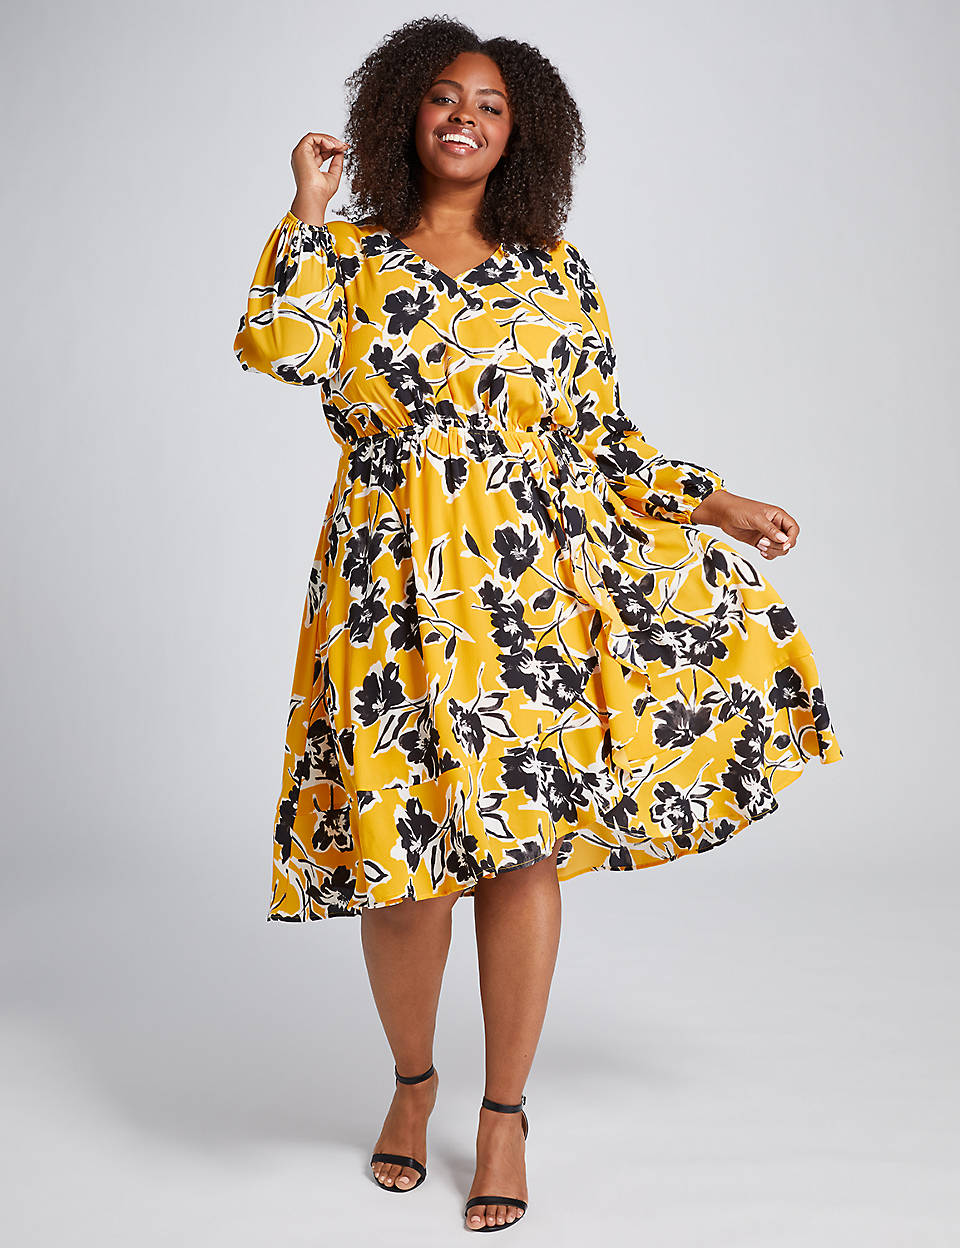 The Sunniest Yellow Dresses For Women ...